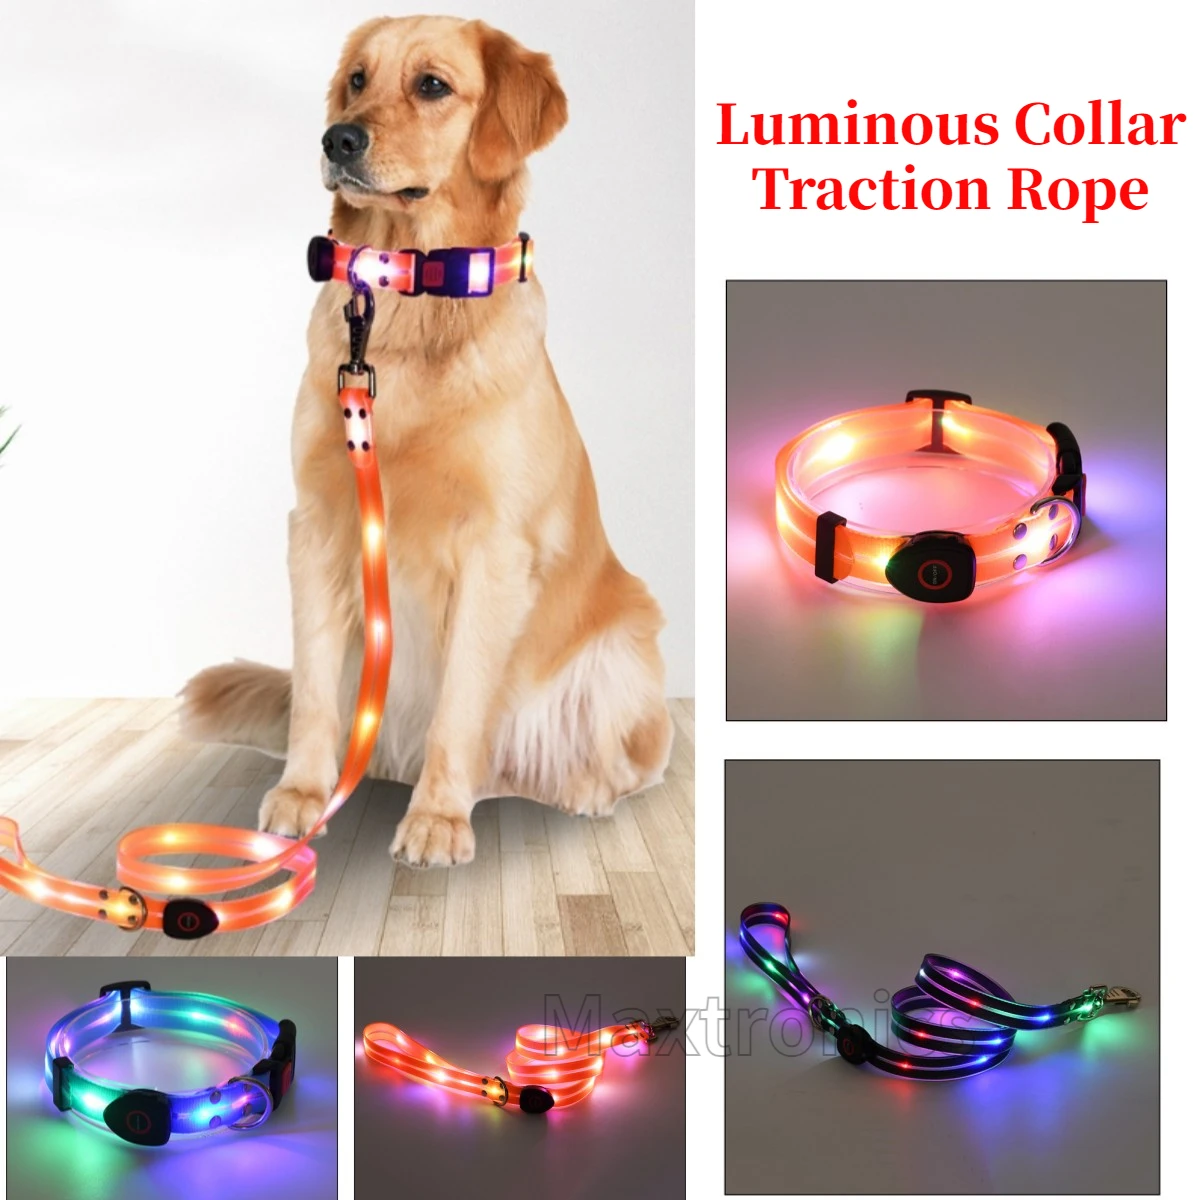 New LED Dog Collar Luminous Pet Supplies Dog Collar Waterpoof Safety Glow Necklace Flashing Traction rope Up Collars Accessories